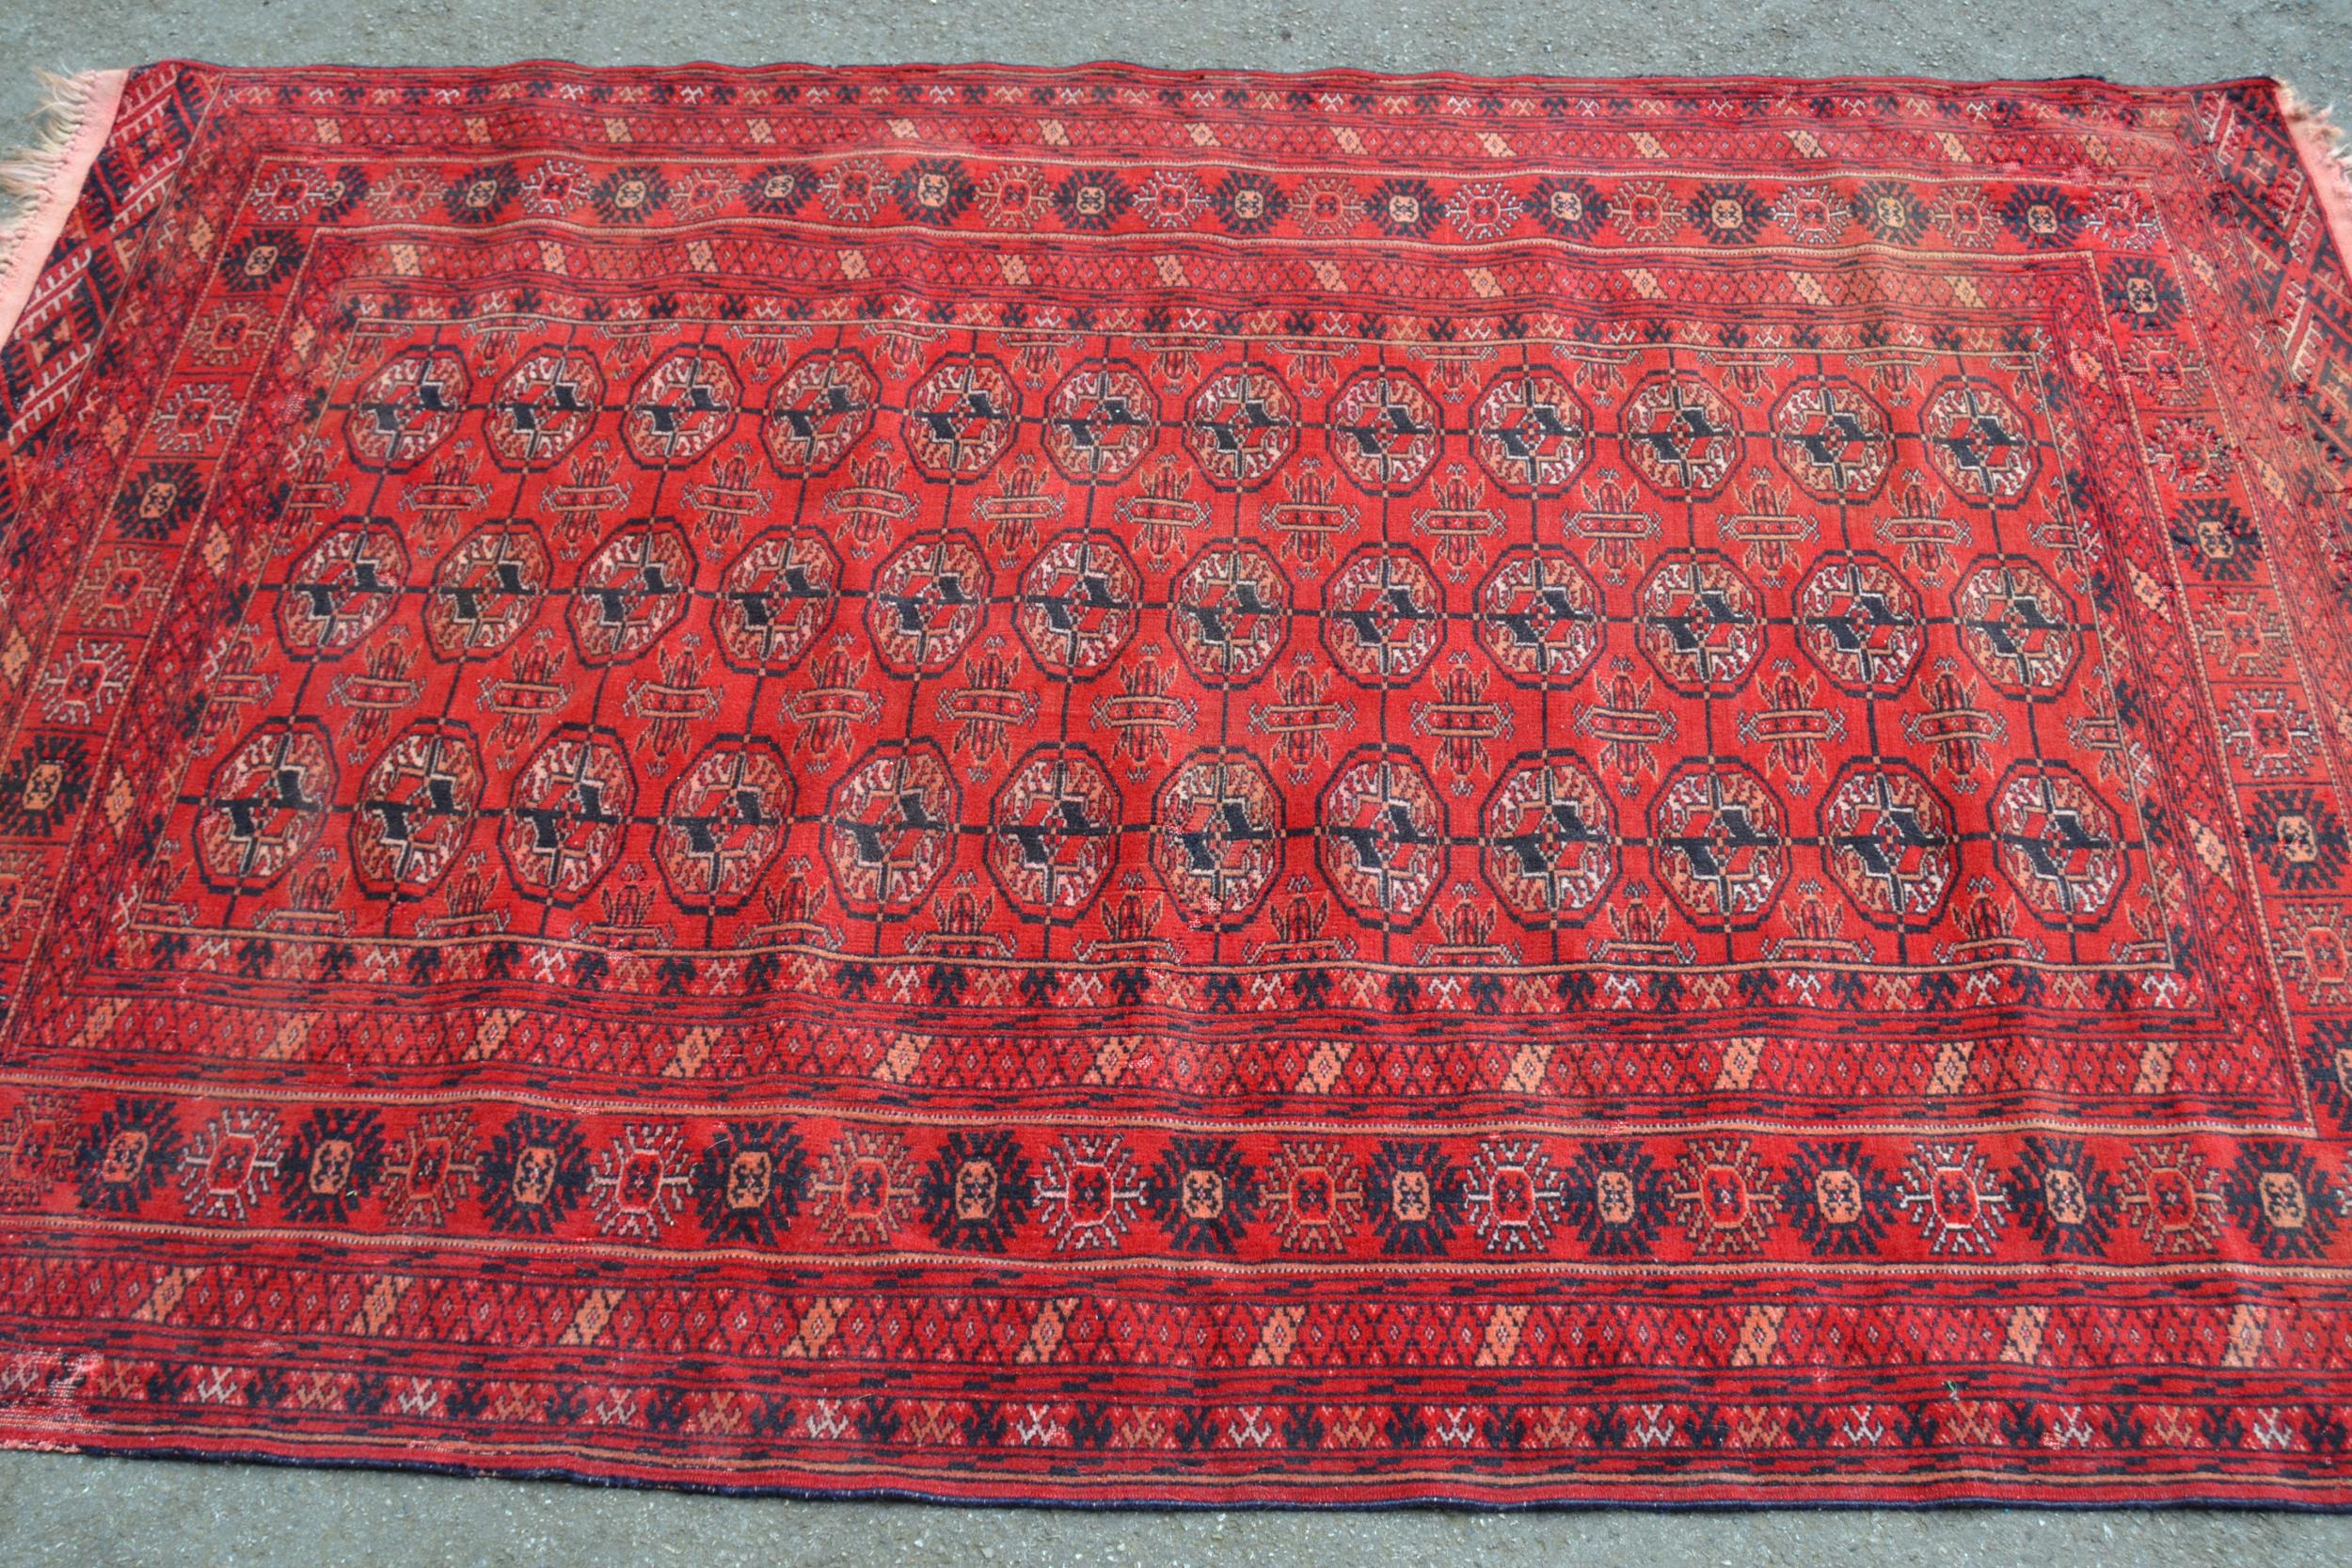 Small Turkoman rug with three rows of twelve gols on a wine ground with multiple borders, 5ft